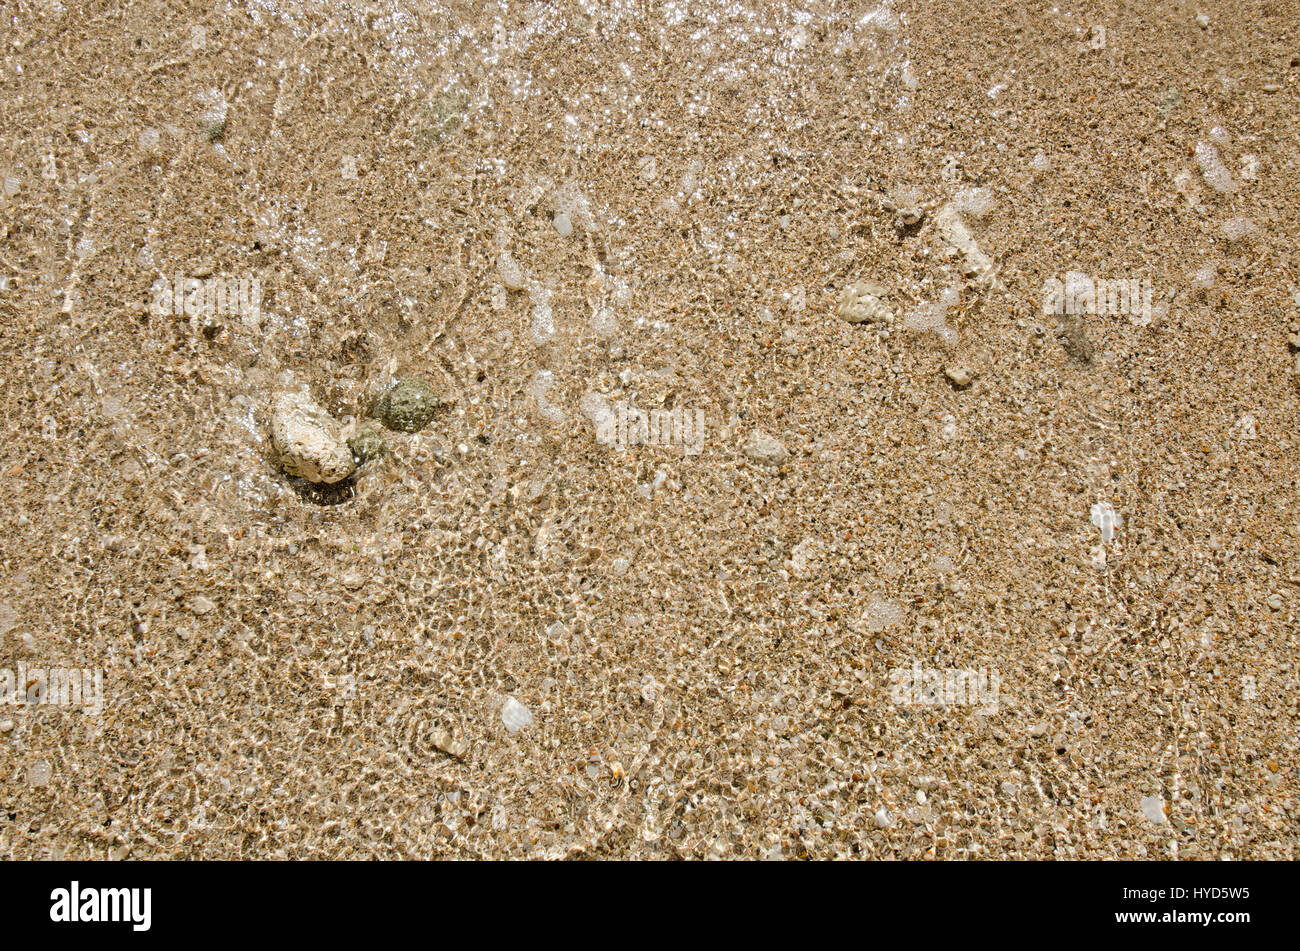 Puerto Rico, Coco Beach, Sand with stones and shells Stock Photo